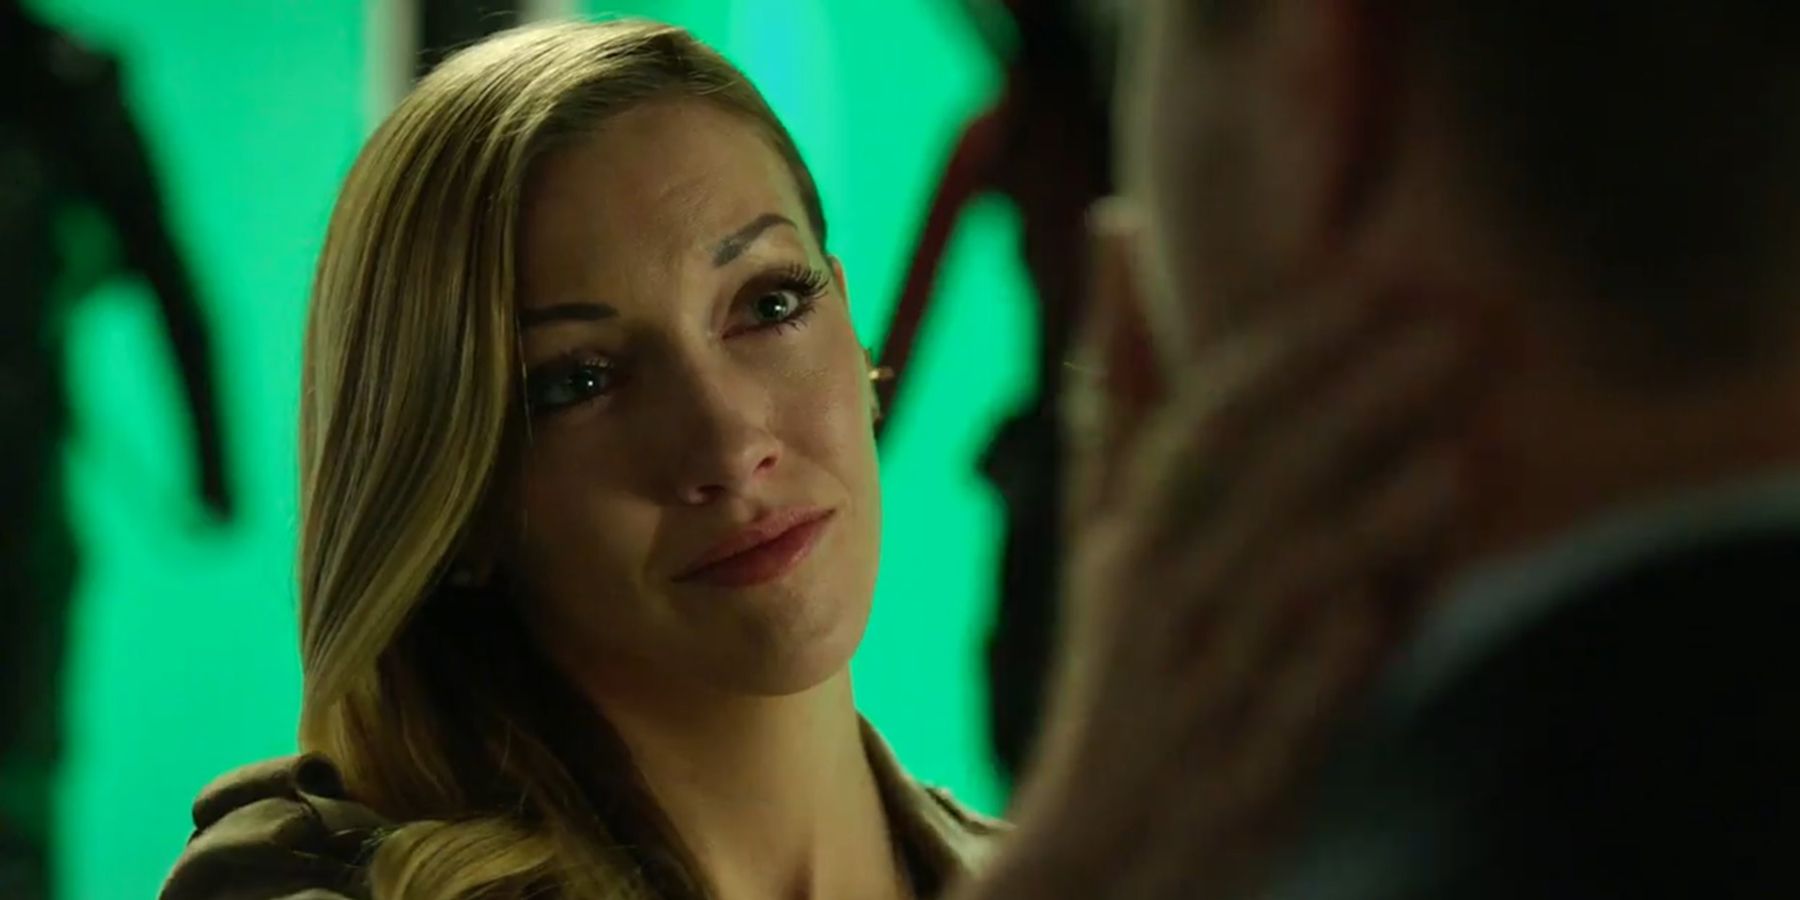 Laurel is back -- but she may not be exactly what she seems.